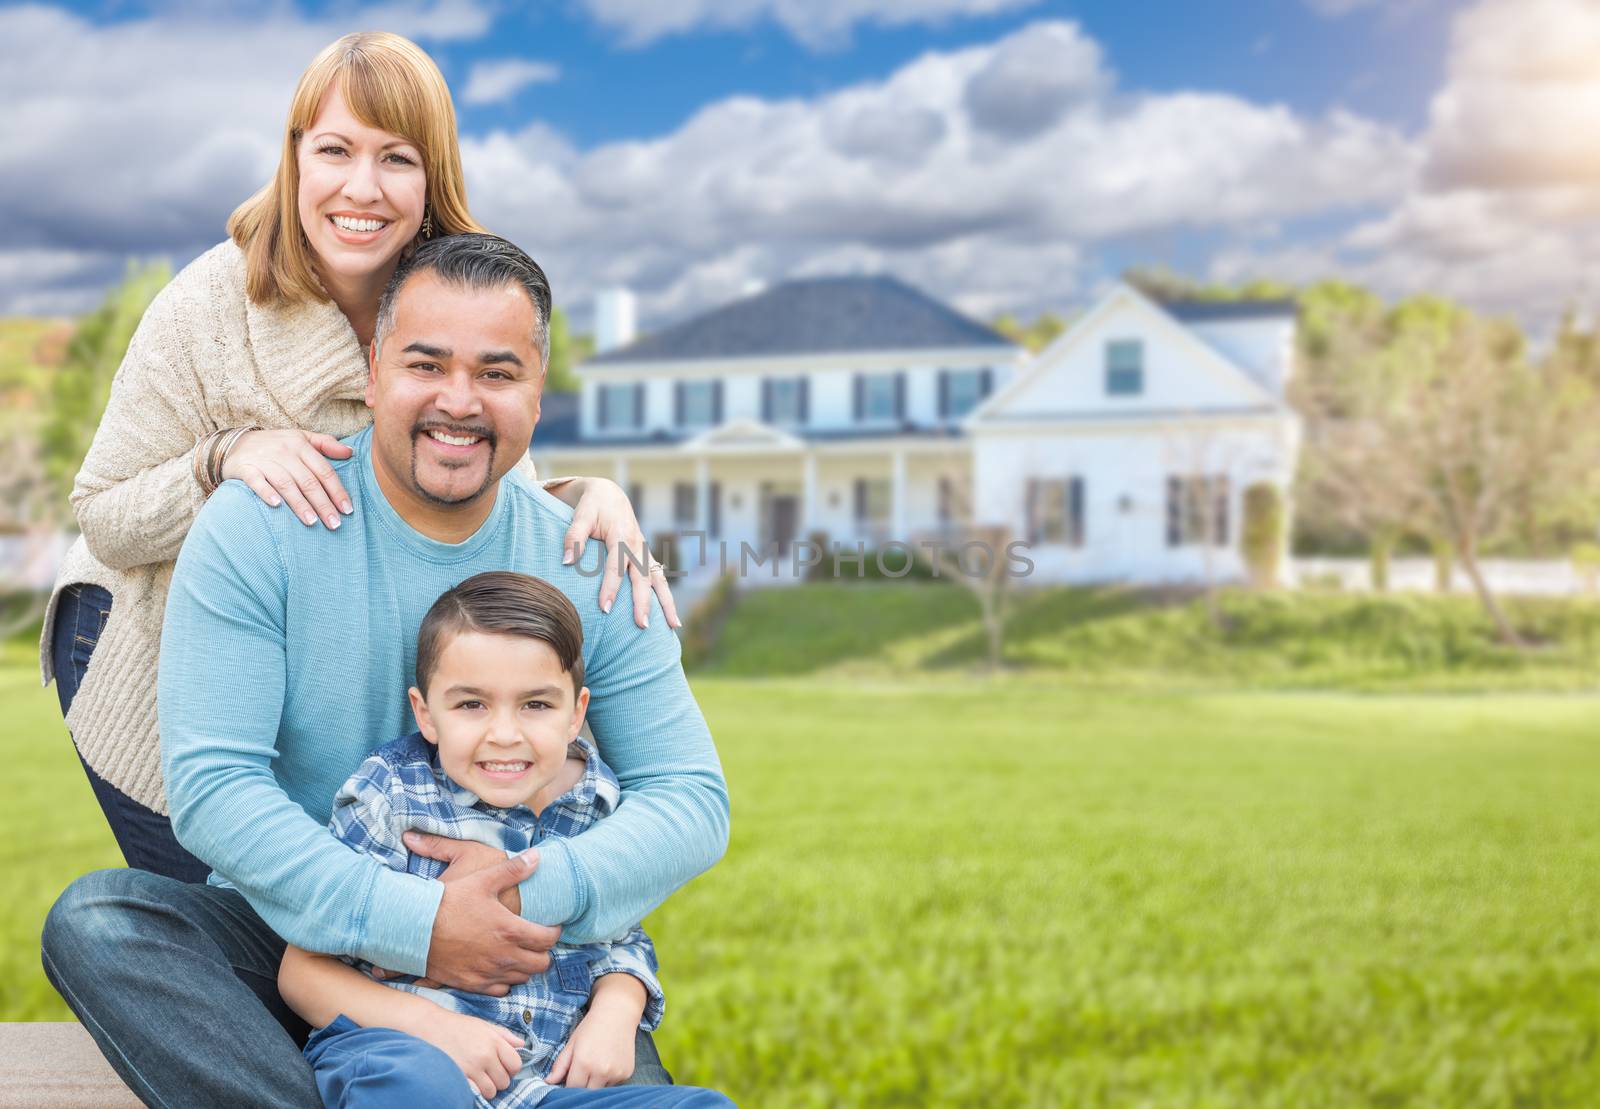 Happy Mixed Race Hispanic and Caucasian Family Portrait In Front of House.